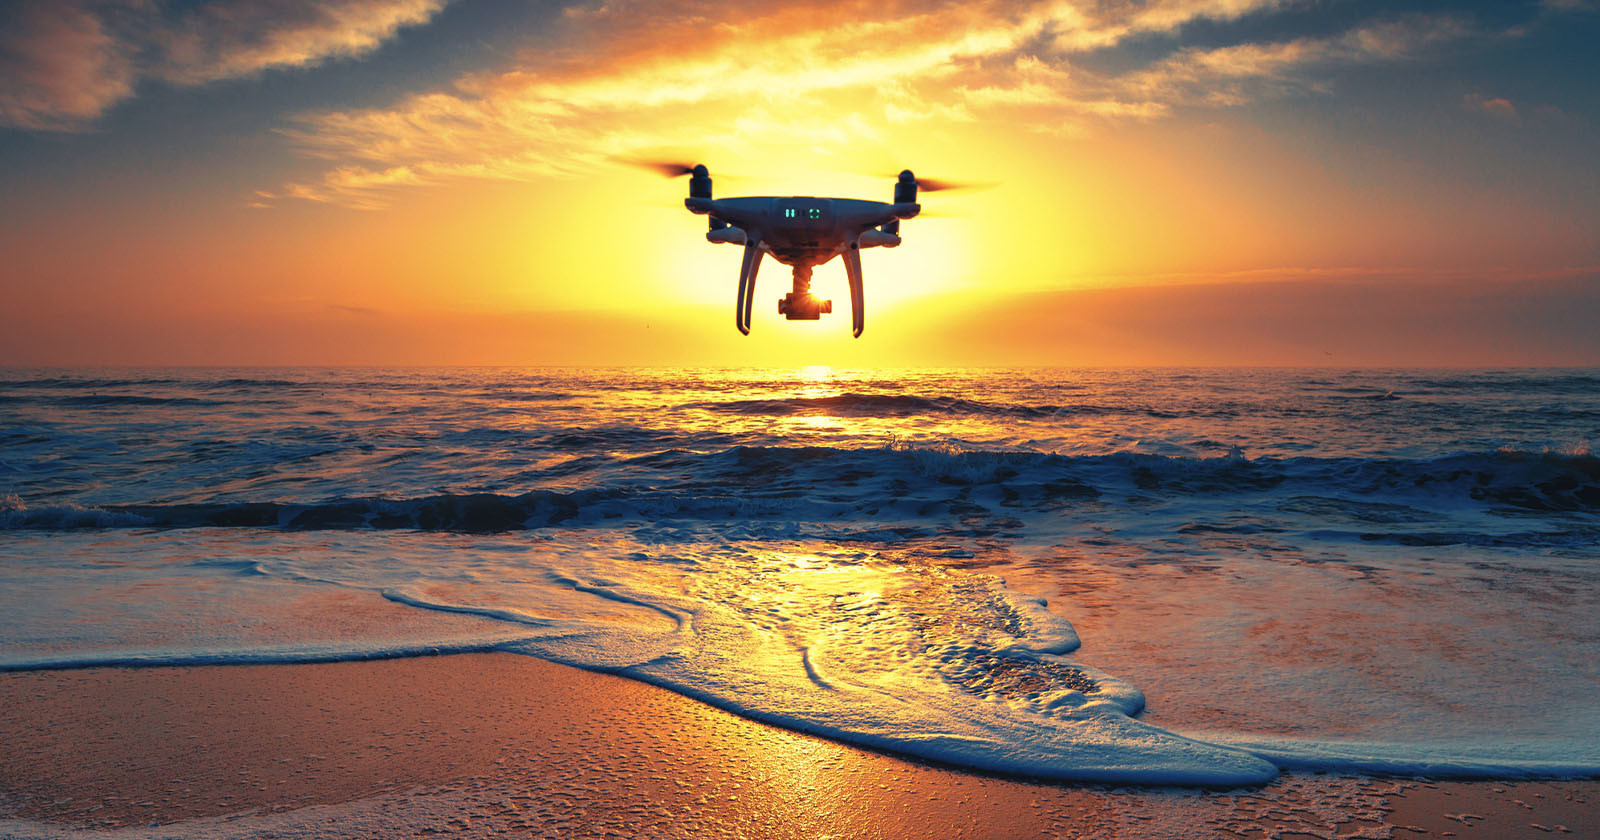  surf photographer questions beach drones they make lot 